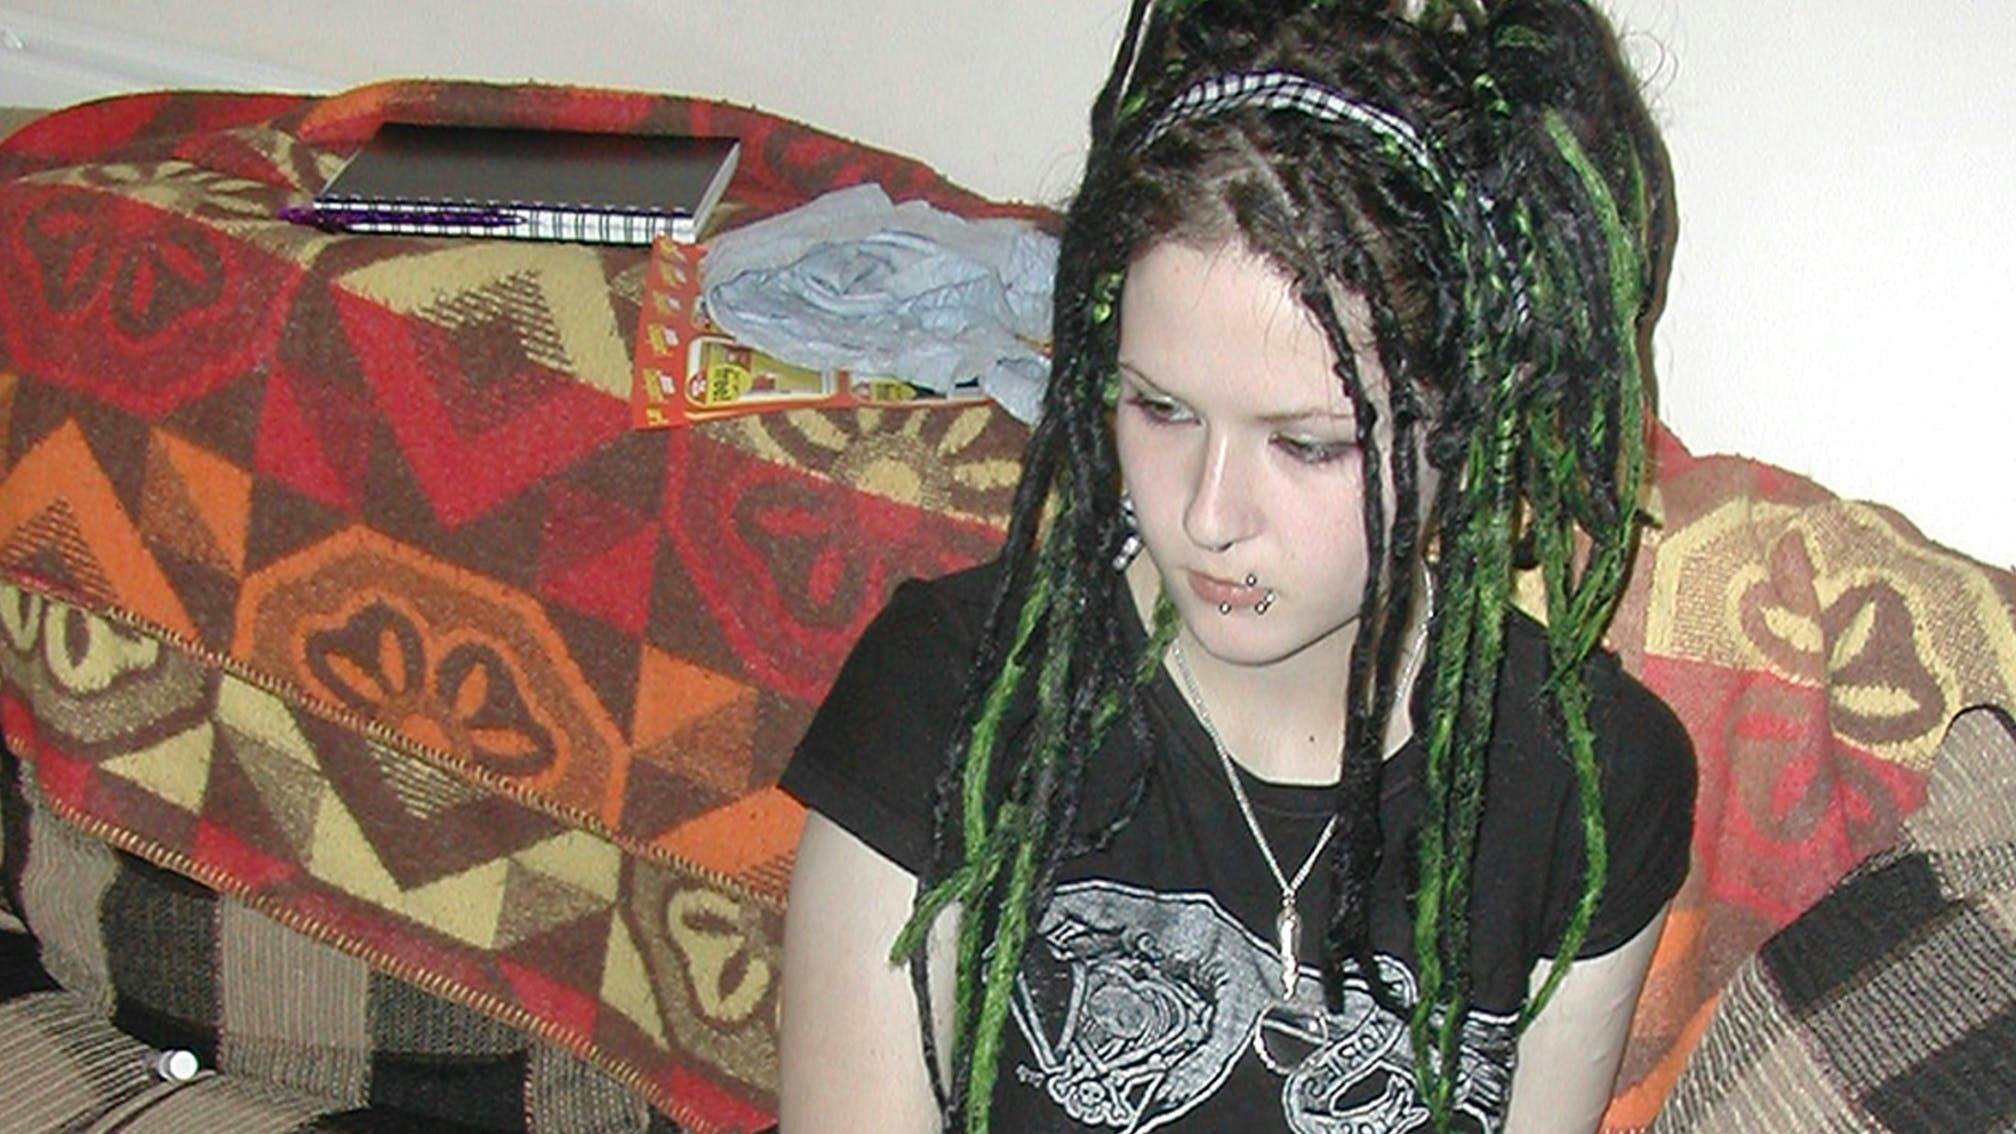 The legacy of Sophie Lancaster: "We should be embracing difference, not scared of it"